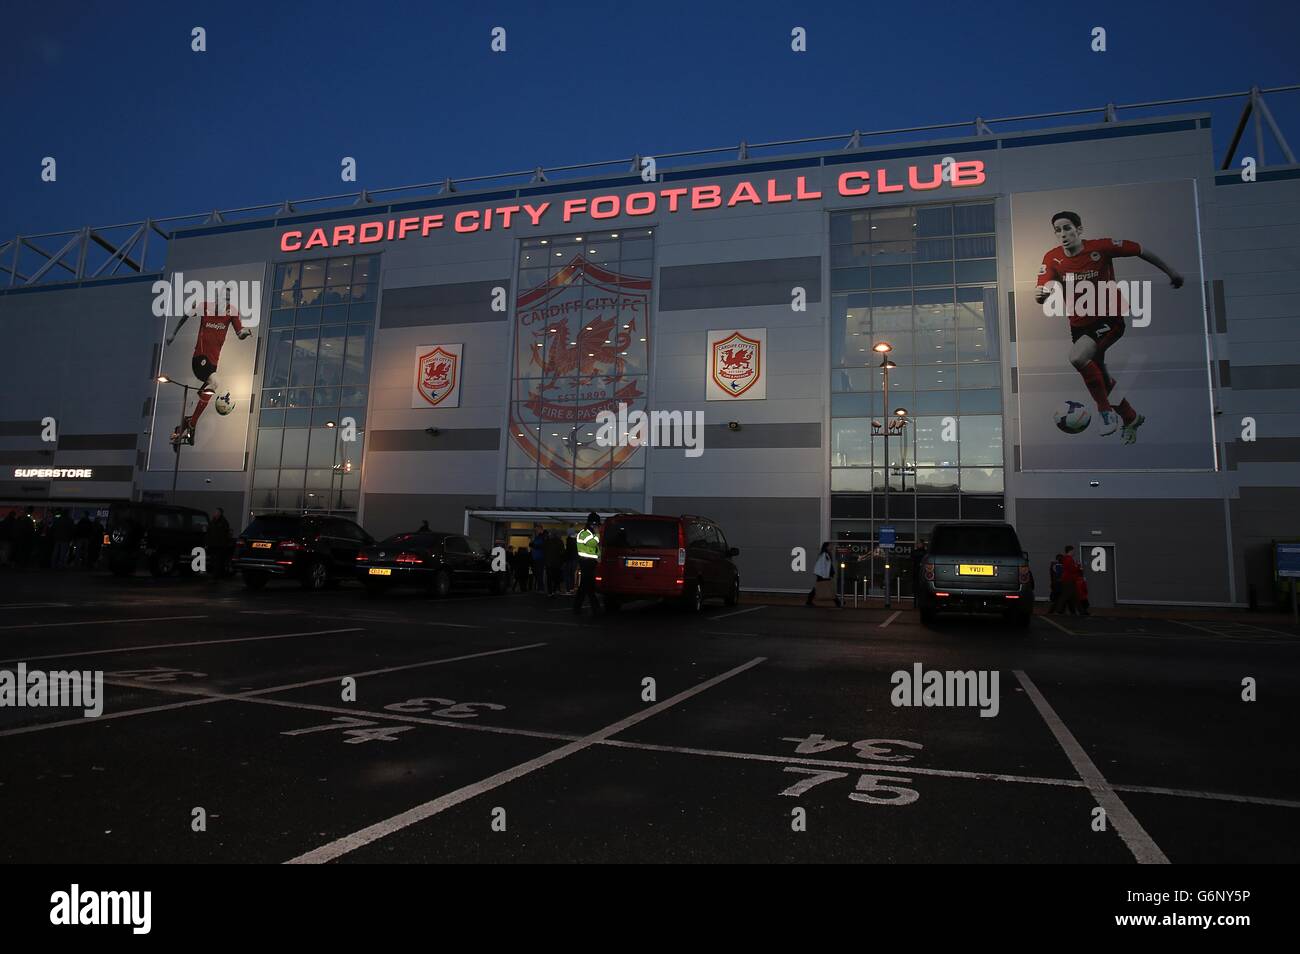 Cardiff City FC Superstore: Weekend Opening Hours